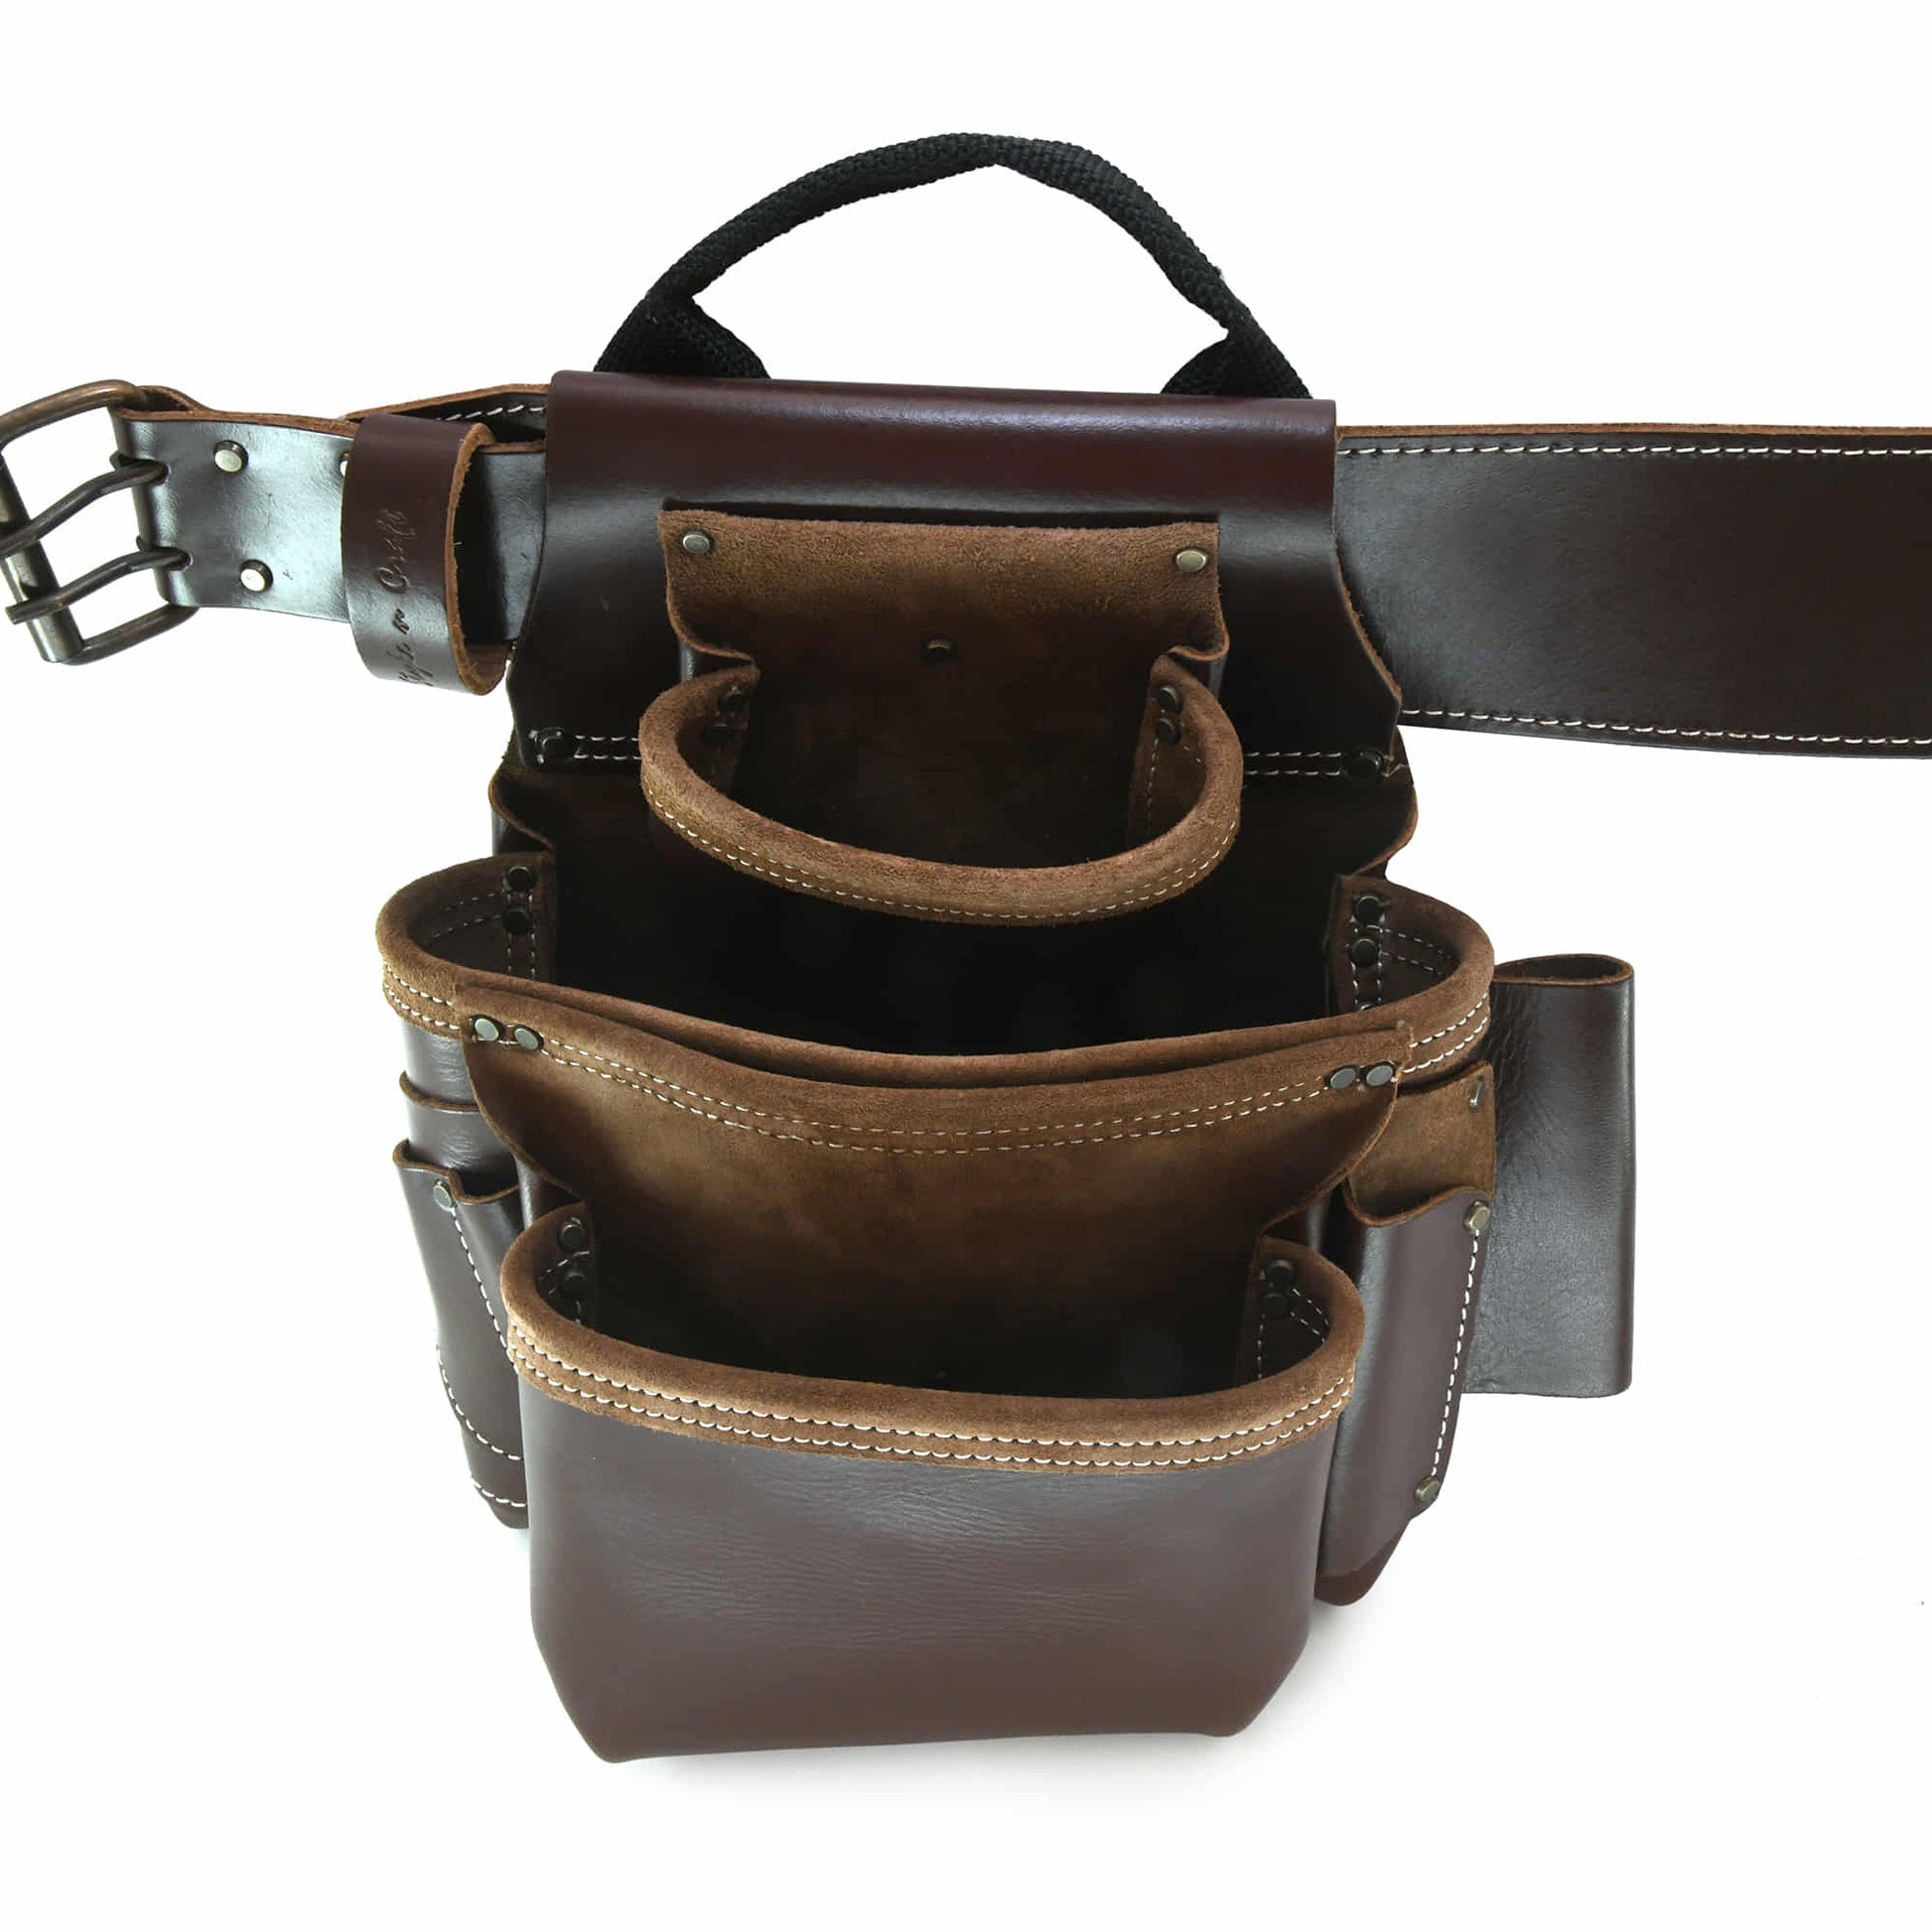 Style n Craft 98464 - Left Side Pouch of the 4 Piece 22 Pocket Electrician's Combo in Top Grain Leather Showing all the Pockets